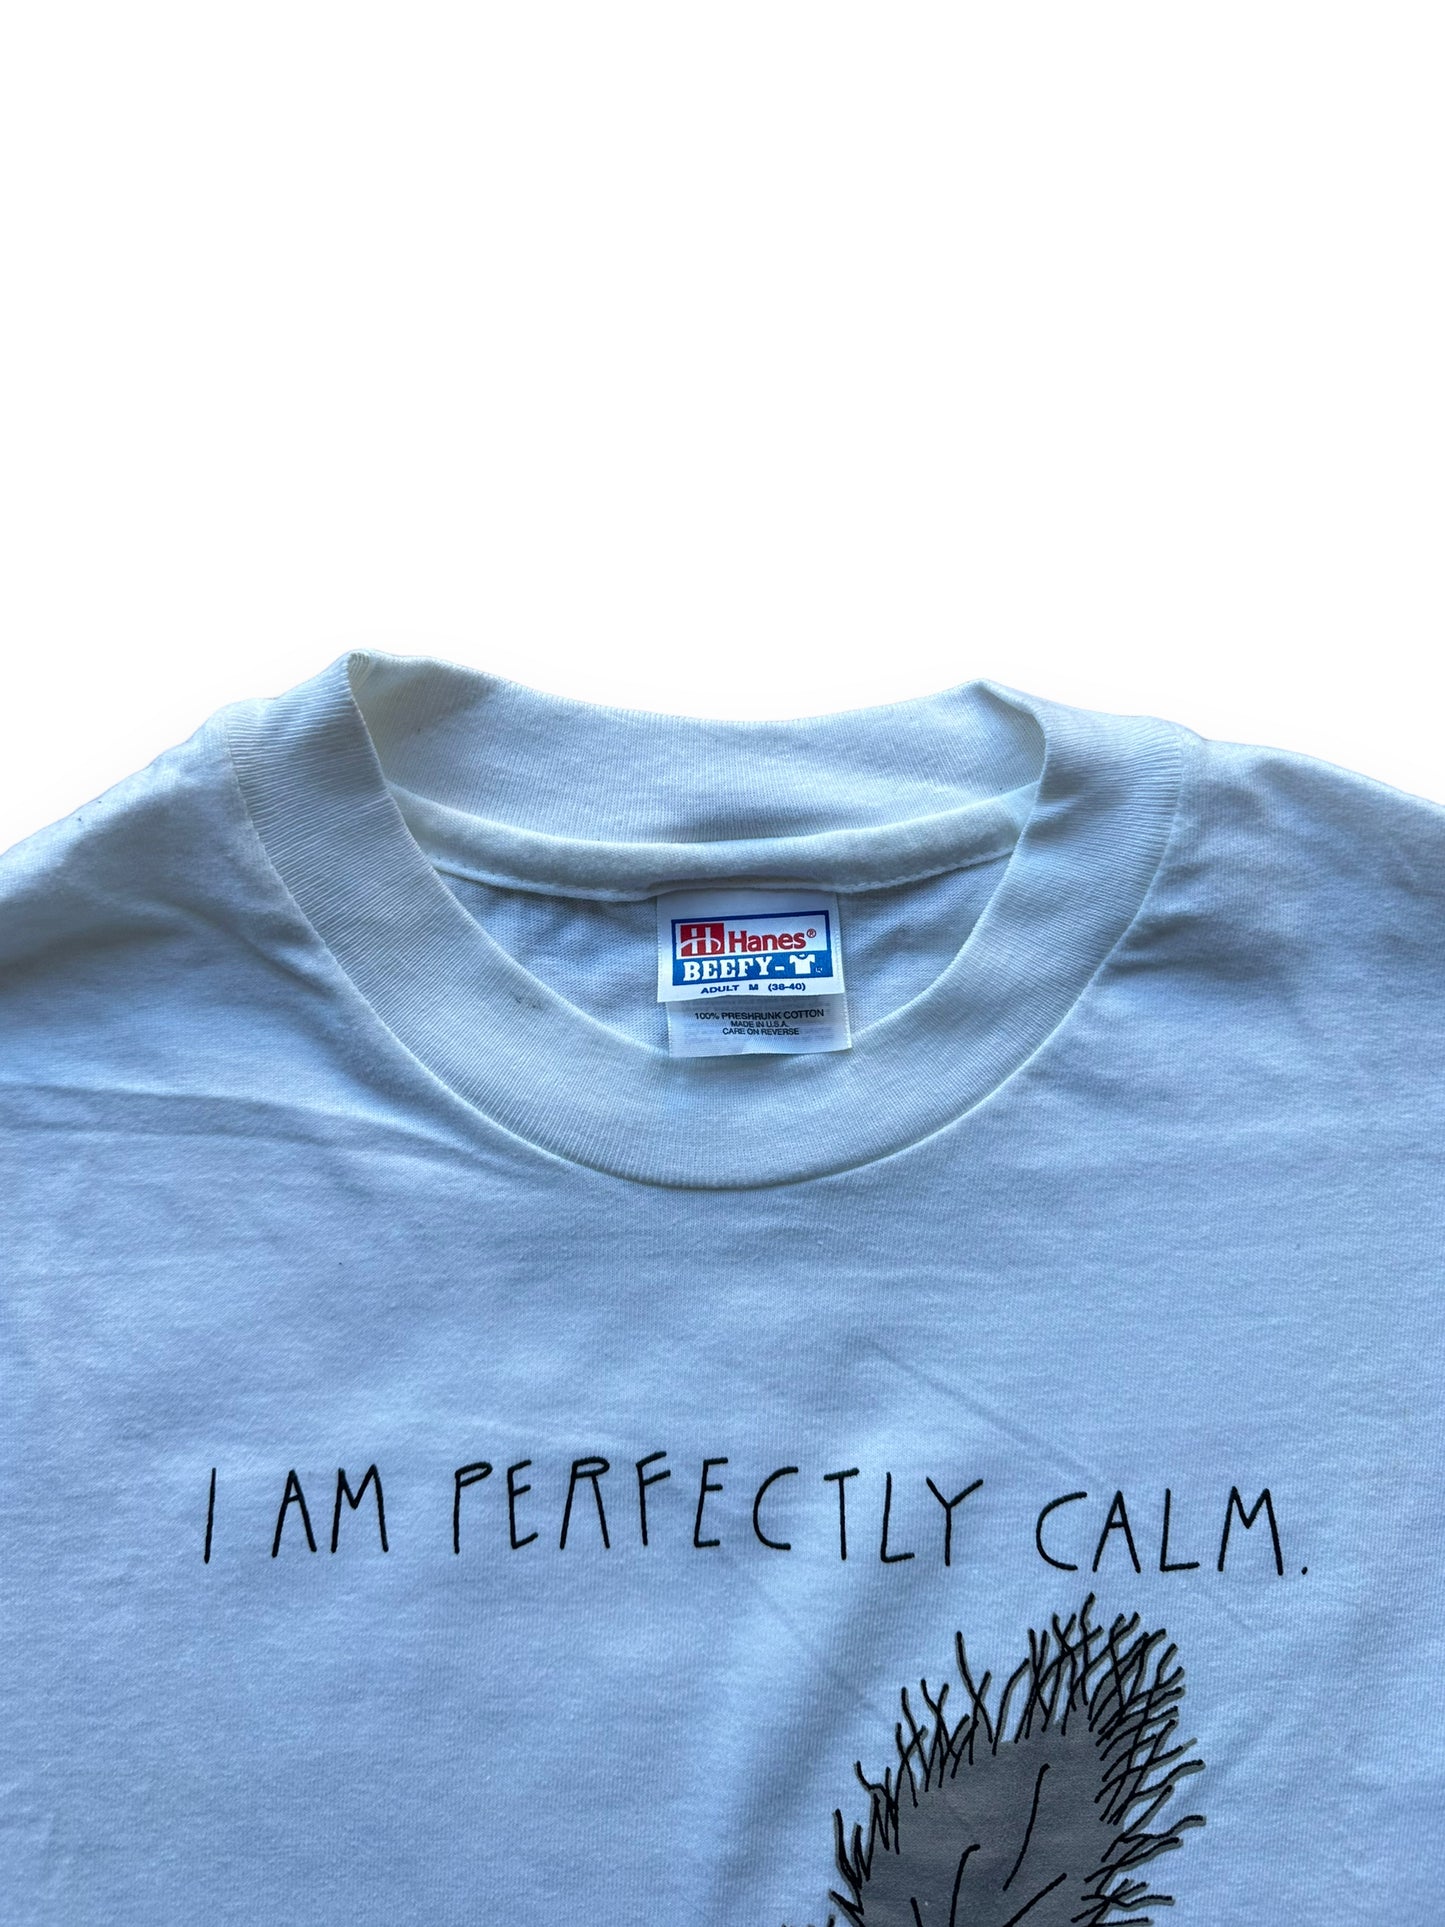 collar of Vintage "I am Perfectly Calm" Cat Tee SZ M |  Vintage Cat Tee Seattle | Barn Owl Vintage